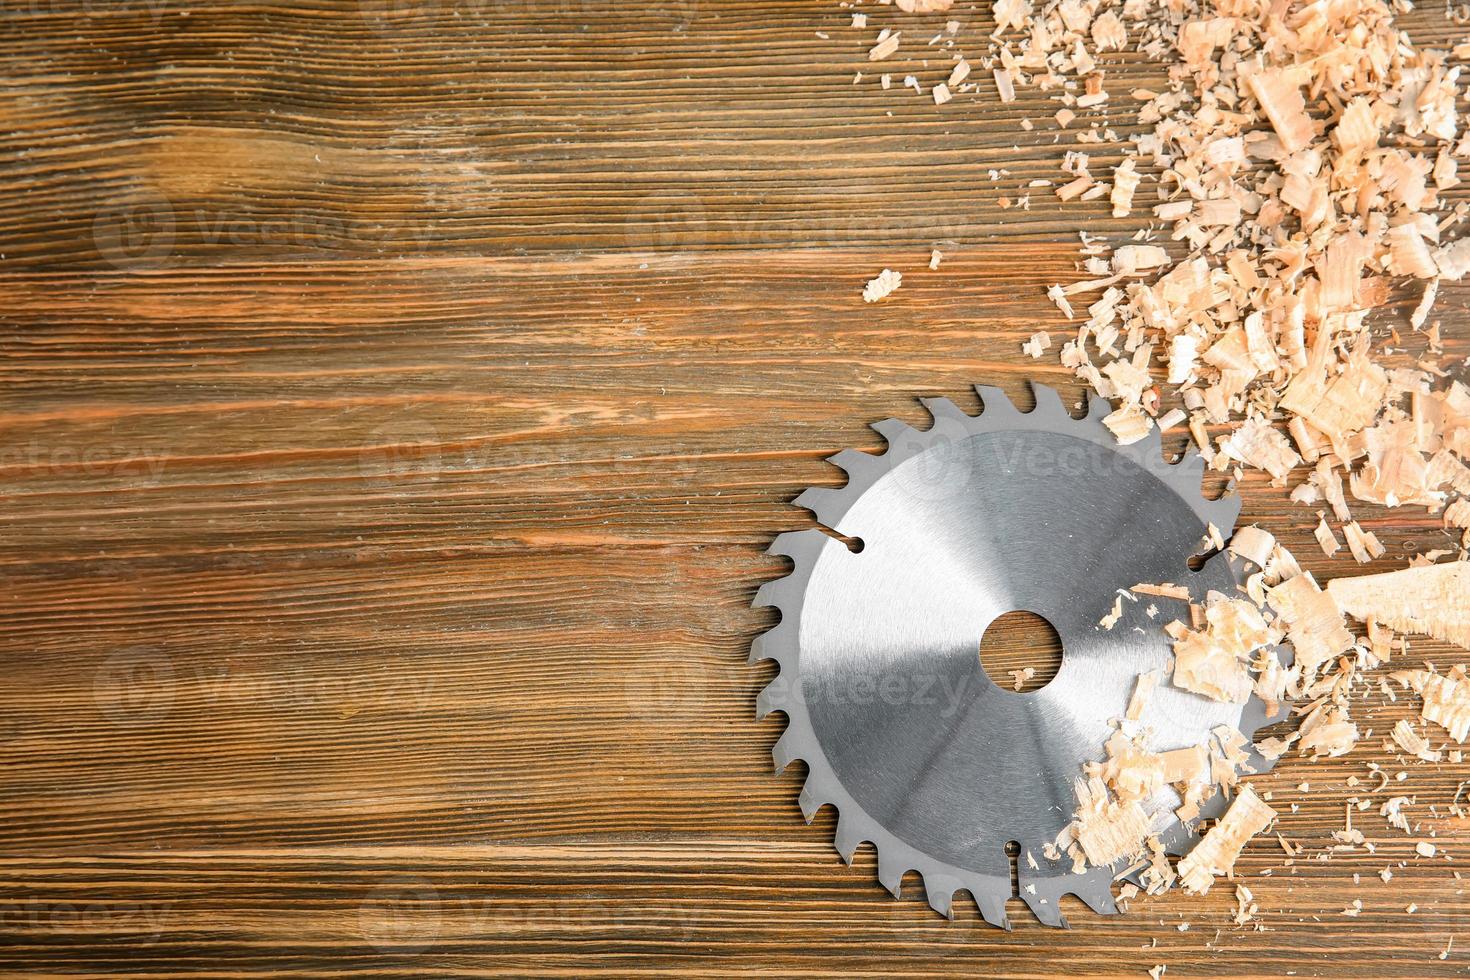 Circular saw disk on wooden background. Professional carpenter's equipment photo